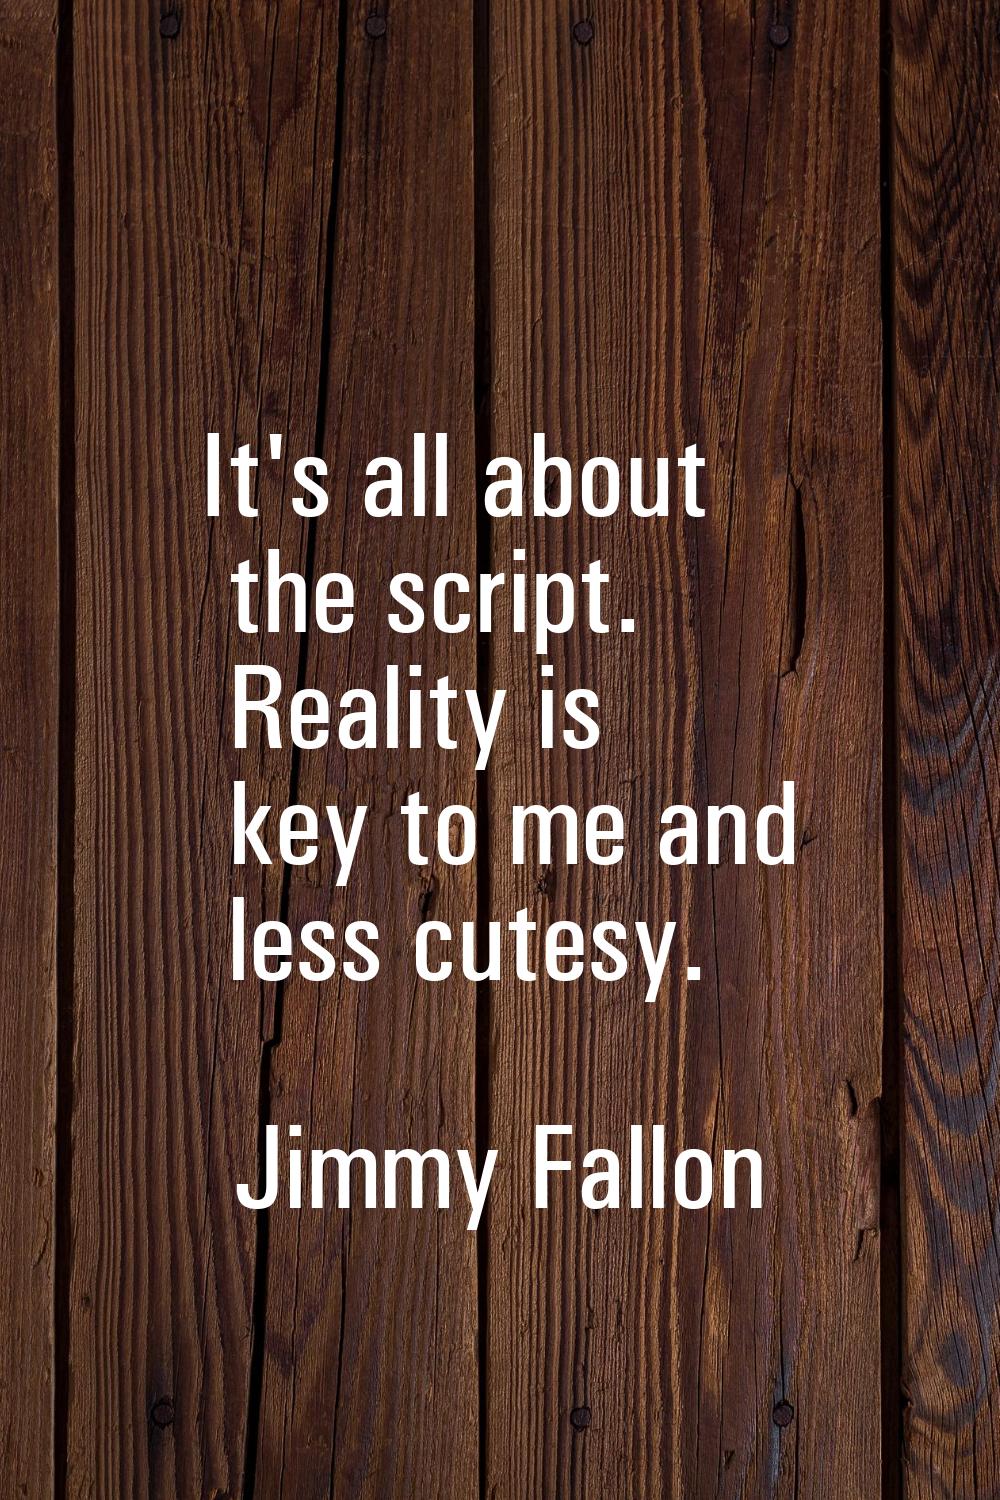 It's all about the script. Reality is key to me and less cutesy.